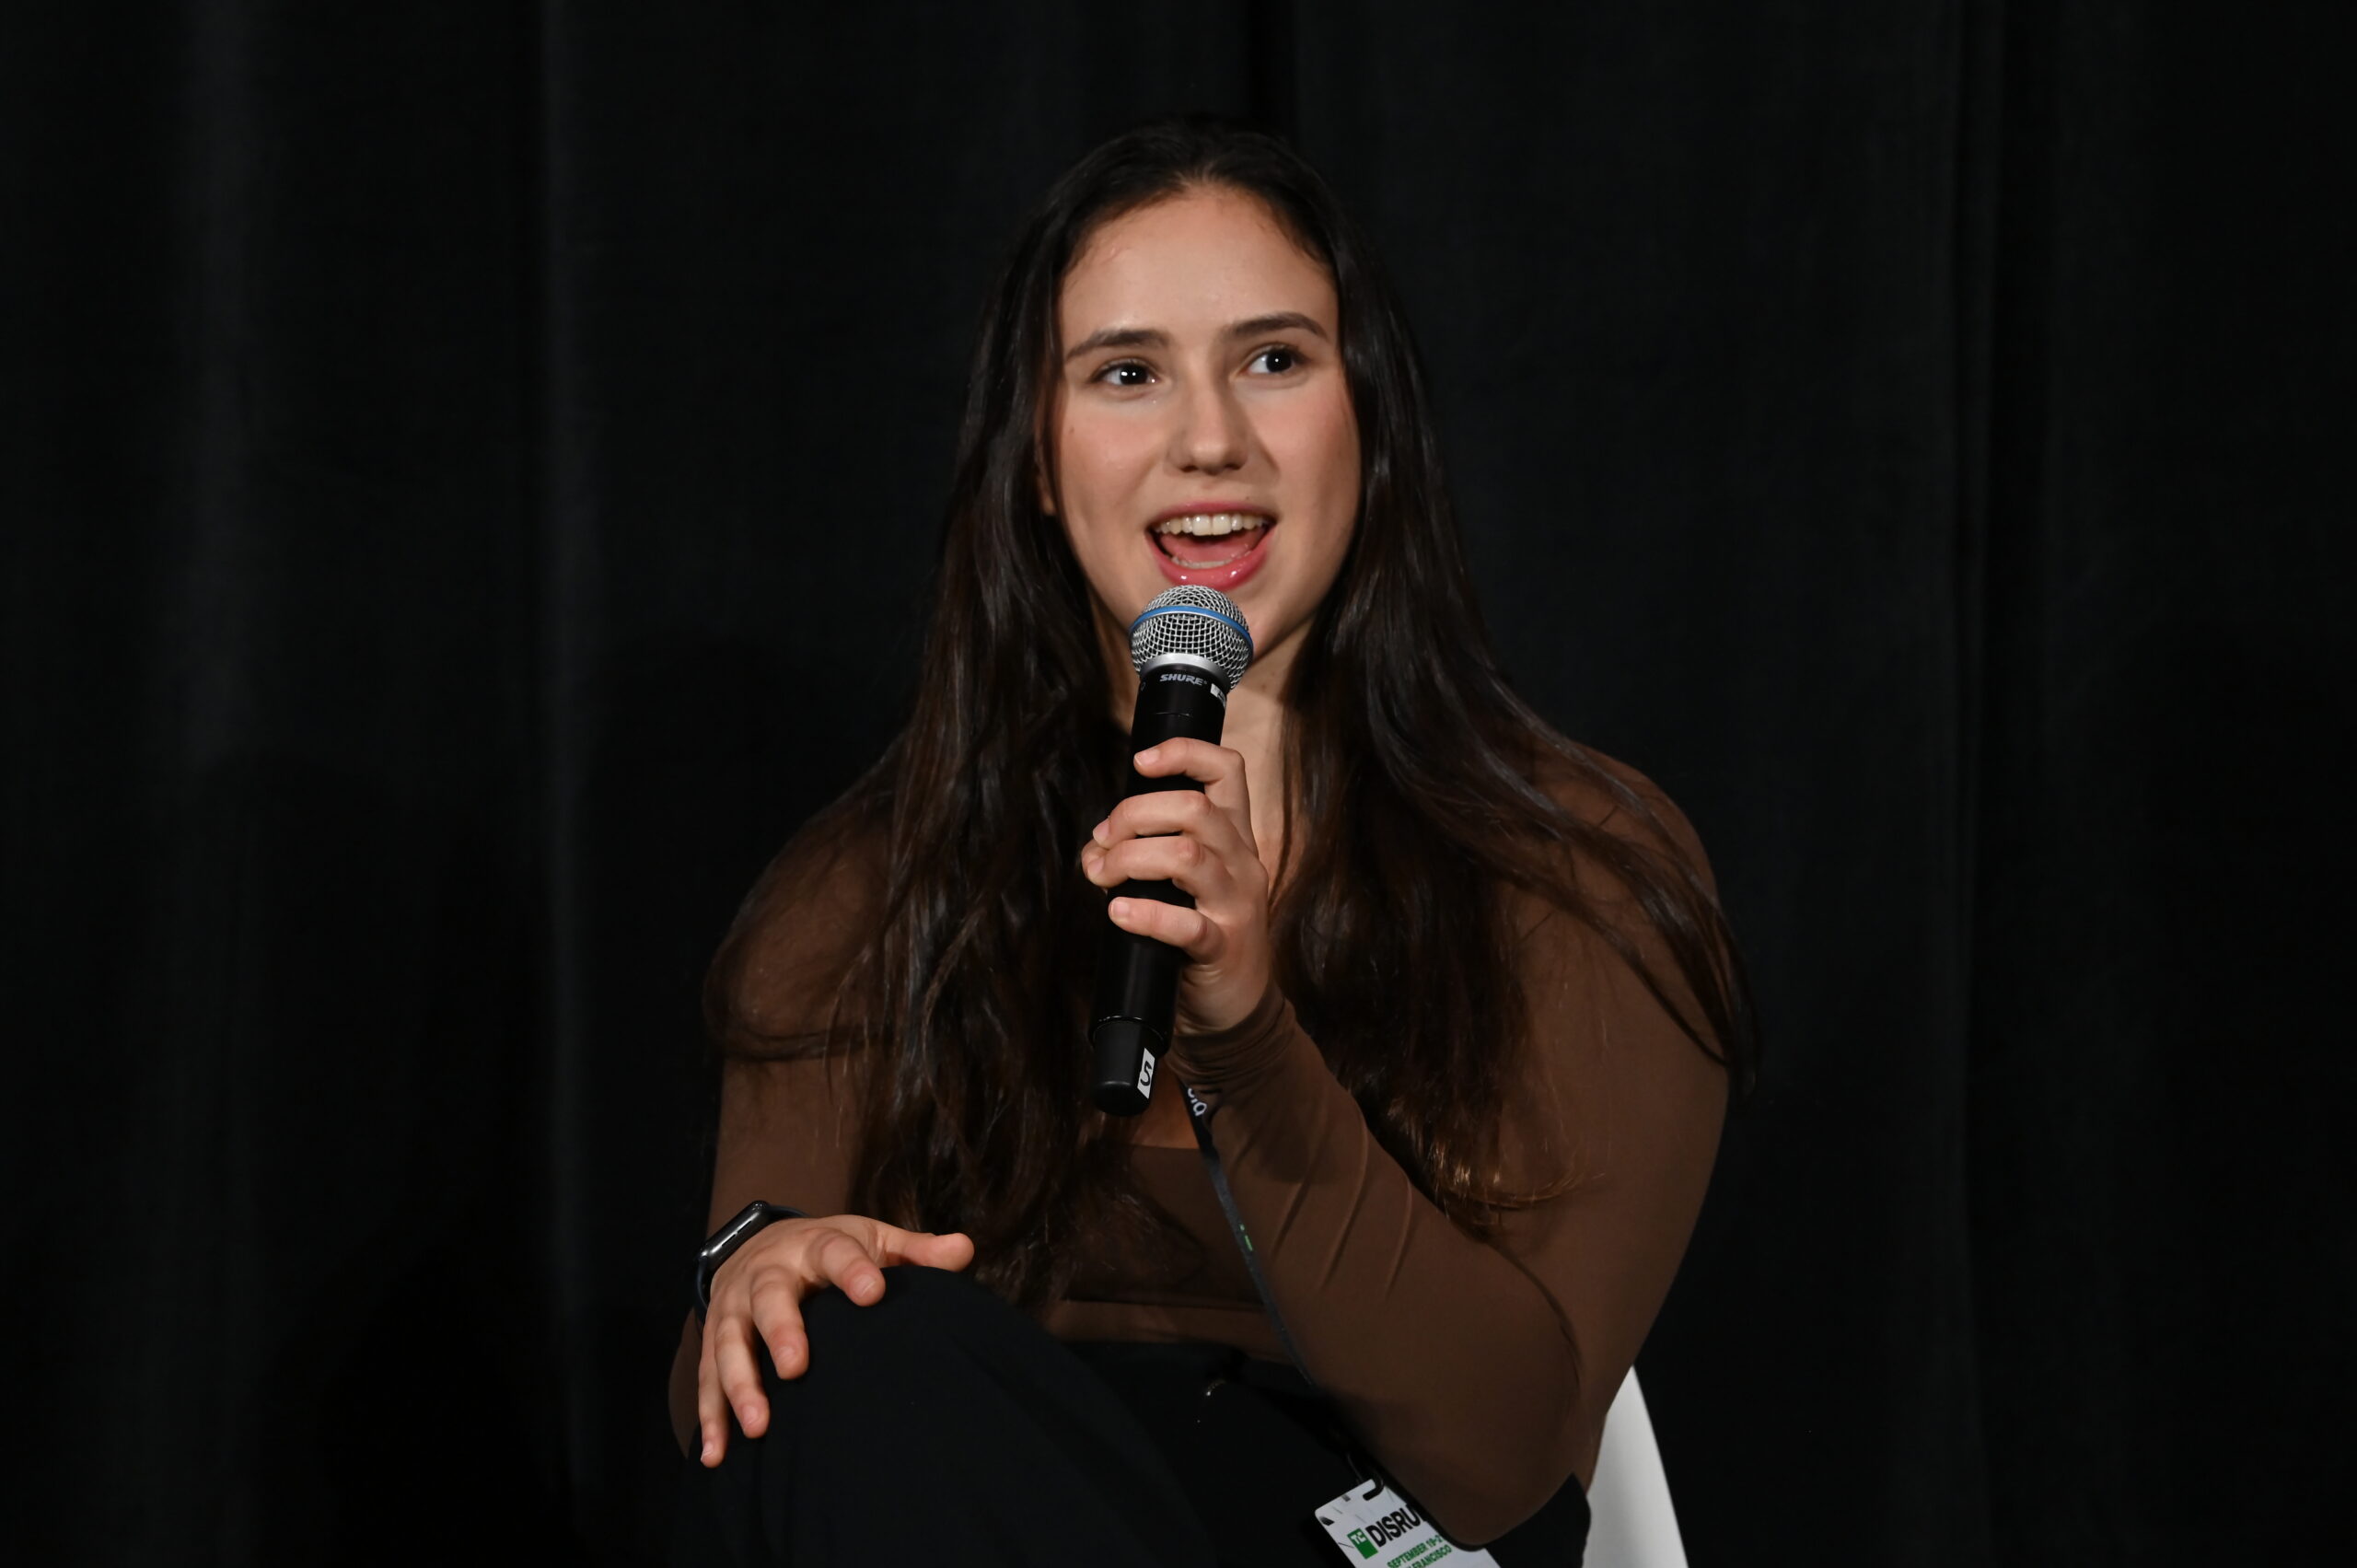 Tandon student Alexandra Debow speaks into a microphone at TechCrunch Disrupt.